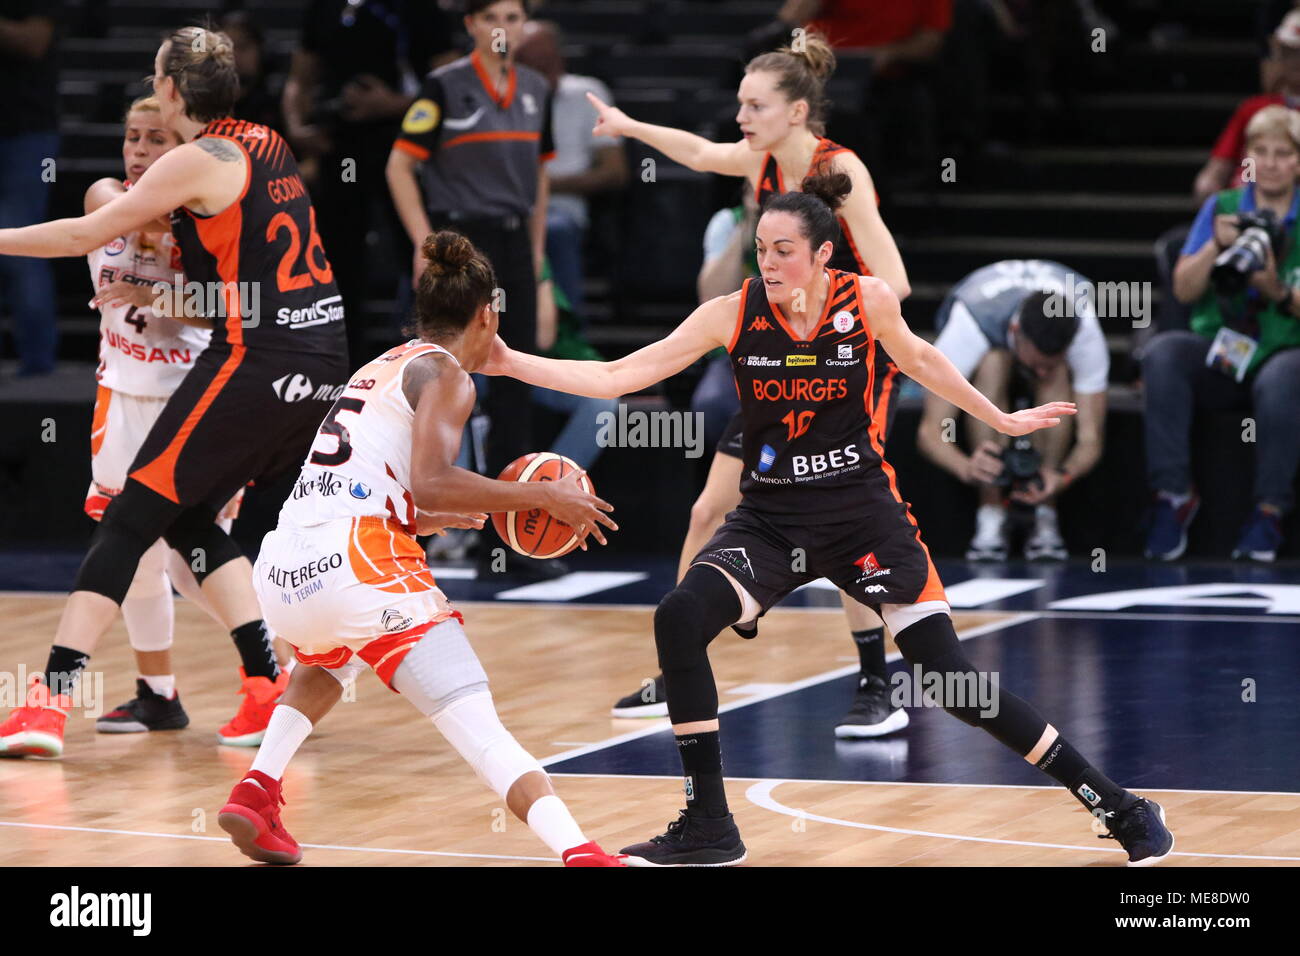 Paris, France. 21st Apr, 2018. Sarah Michel (R) in action during the France  Women's Basketball Cup between Tango Bourges basket and Flammes Carolo  Basket Ardennes in AccorHotel Arena of Paris. Credit: Elyxandro